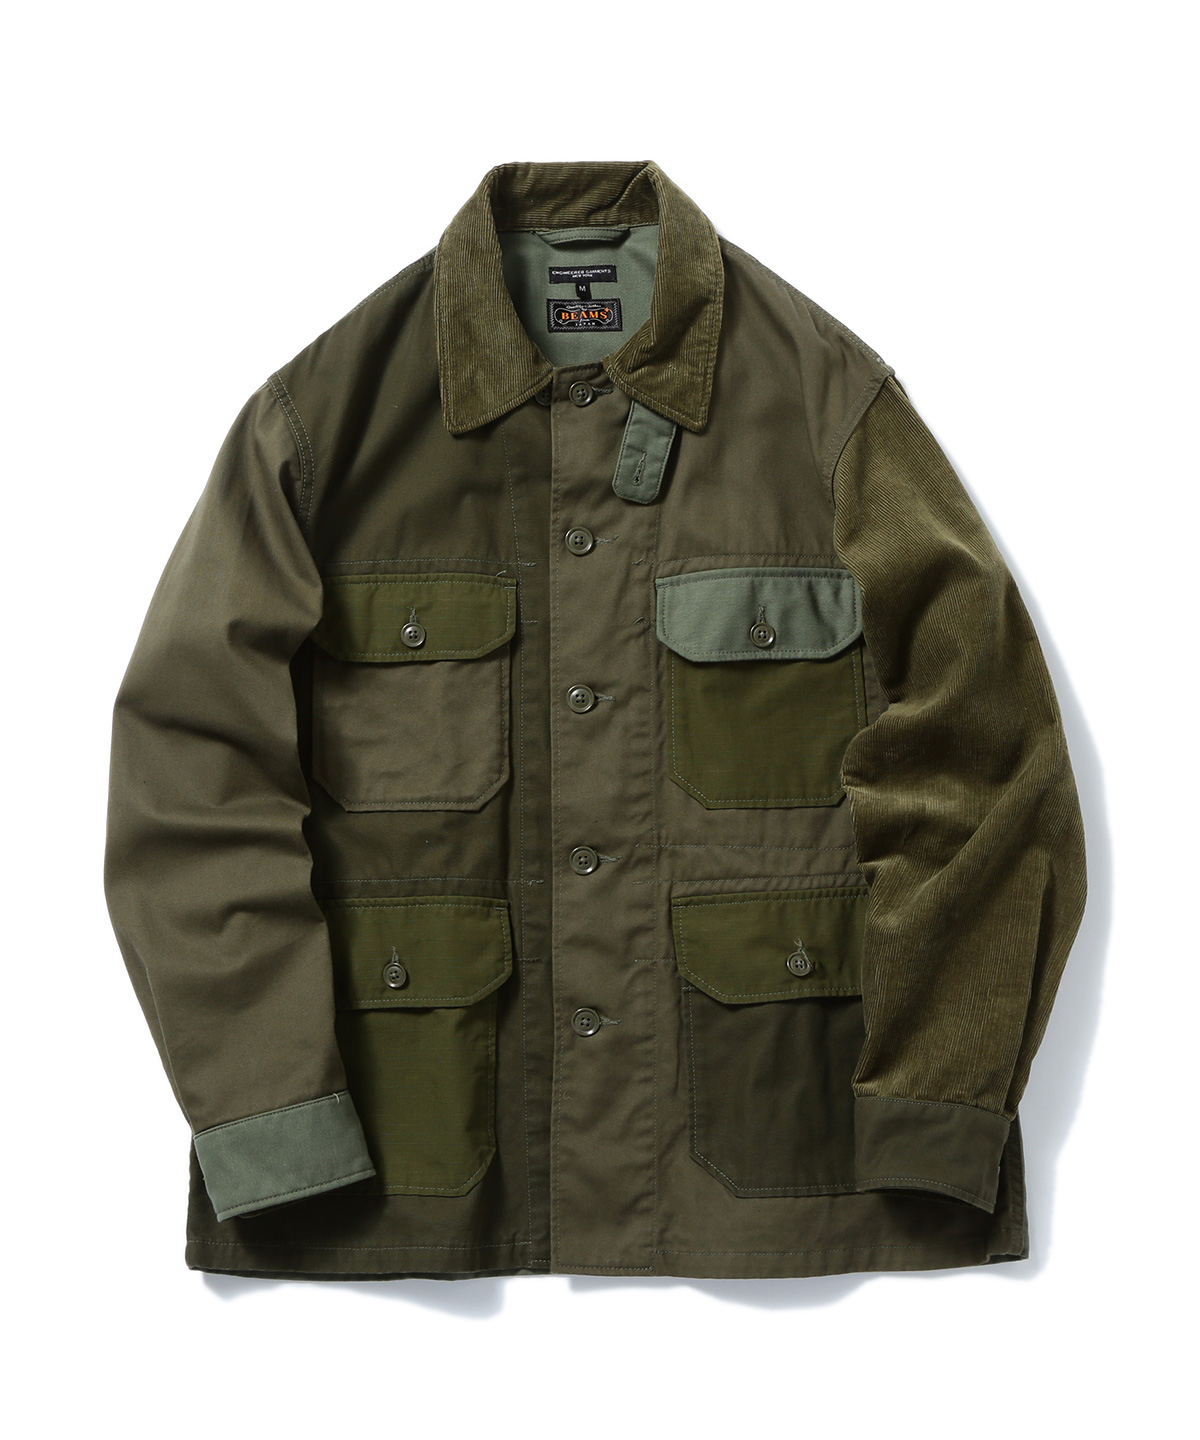 BEAMS PLUS teams up with Engineered Garments for an olive capsule